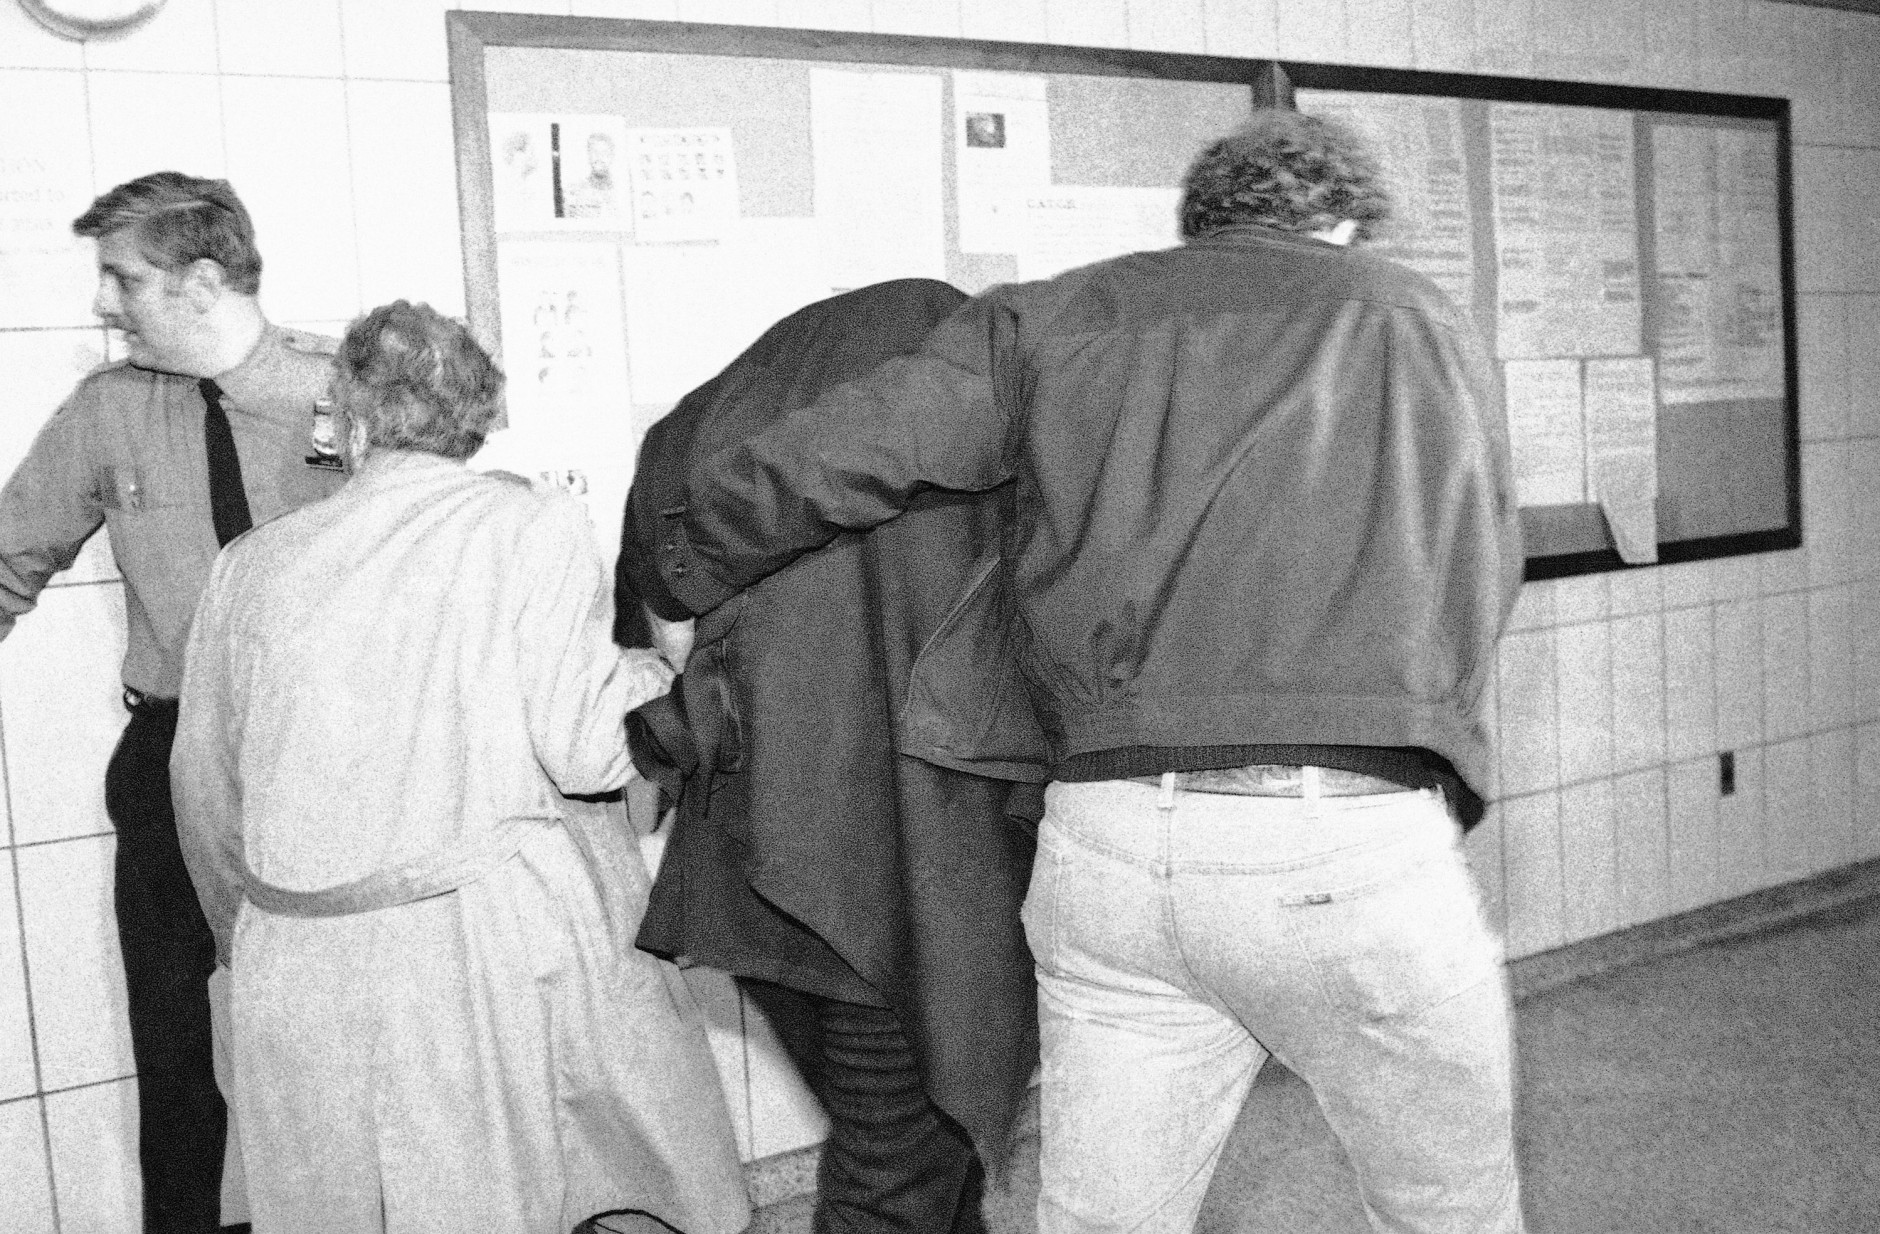 A man believed to be Mark David Chapman, covered center, is hustled from a New York City police station, to be booked at headquarters, Tuesday, Dec. 9, 1980. Chapman is expected to be charged in the murder of former Beatle John Lennon in New York last night. (AP Photo/Handshuh)